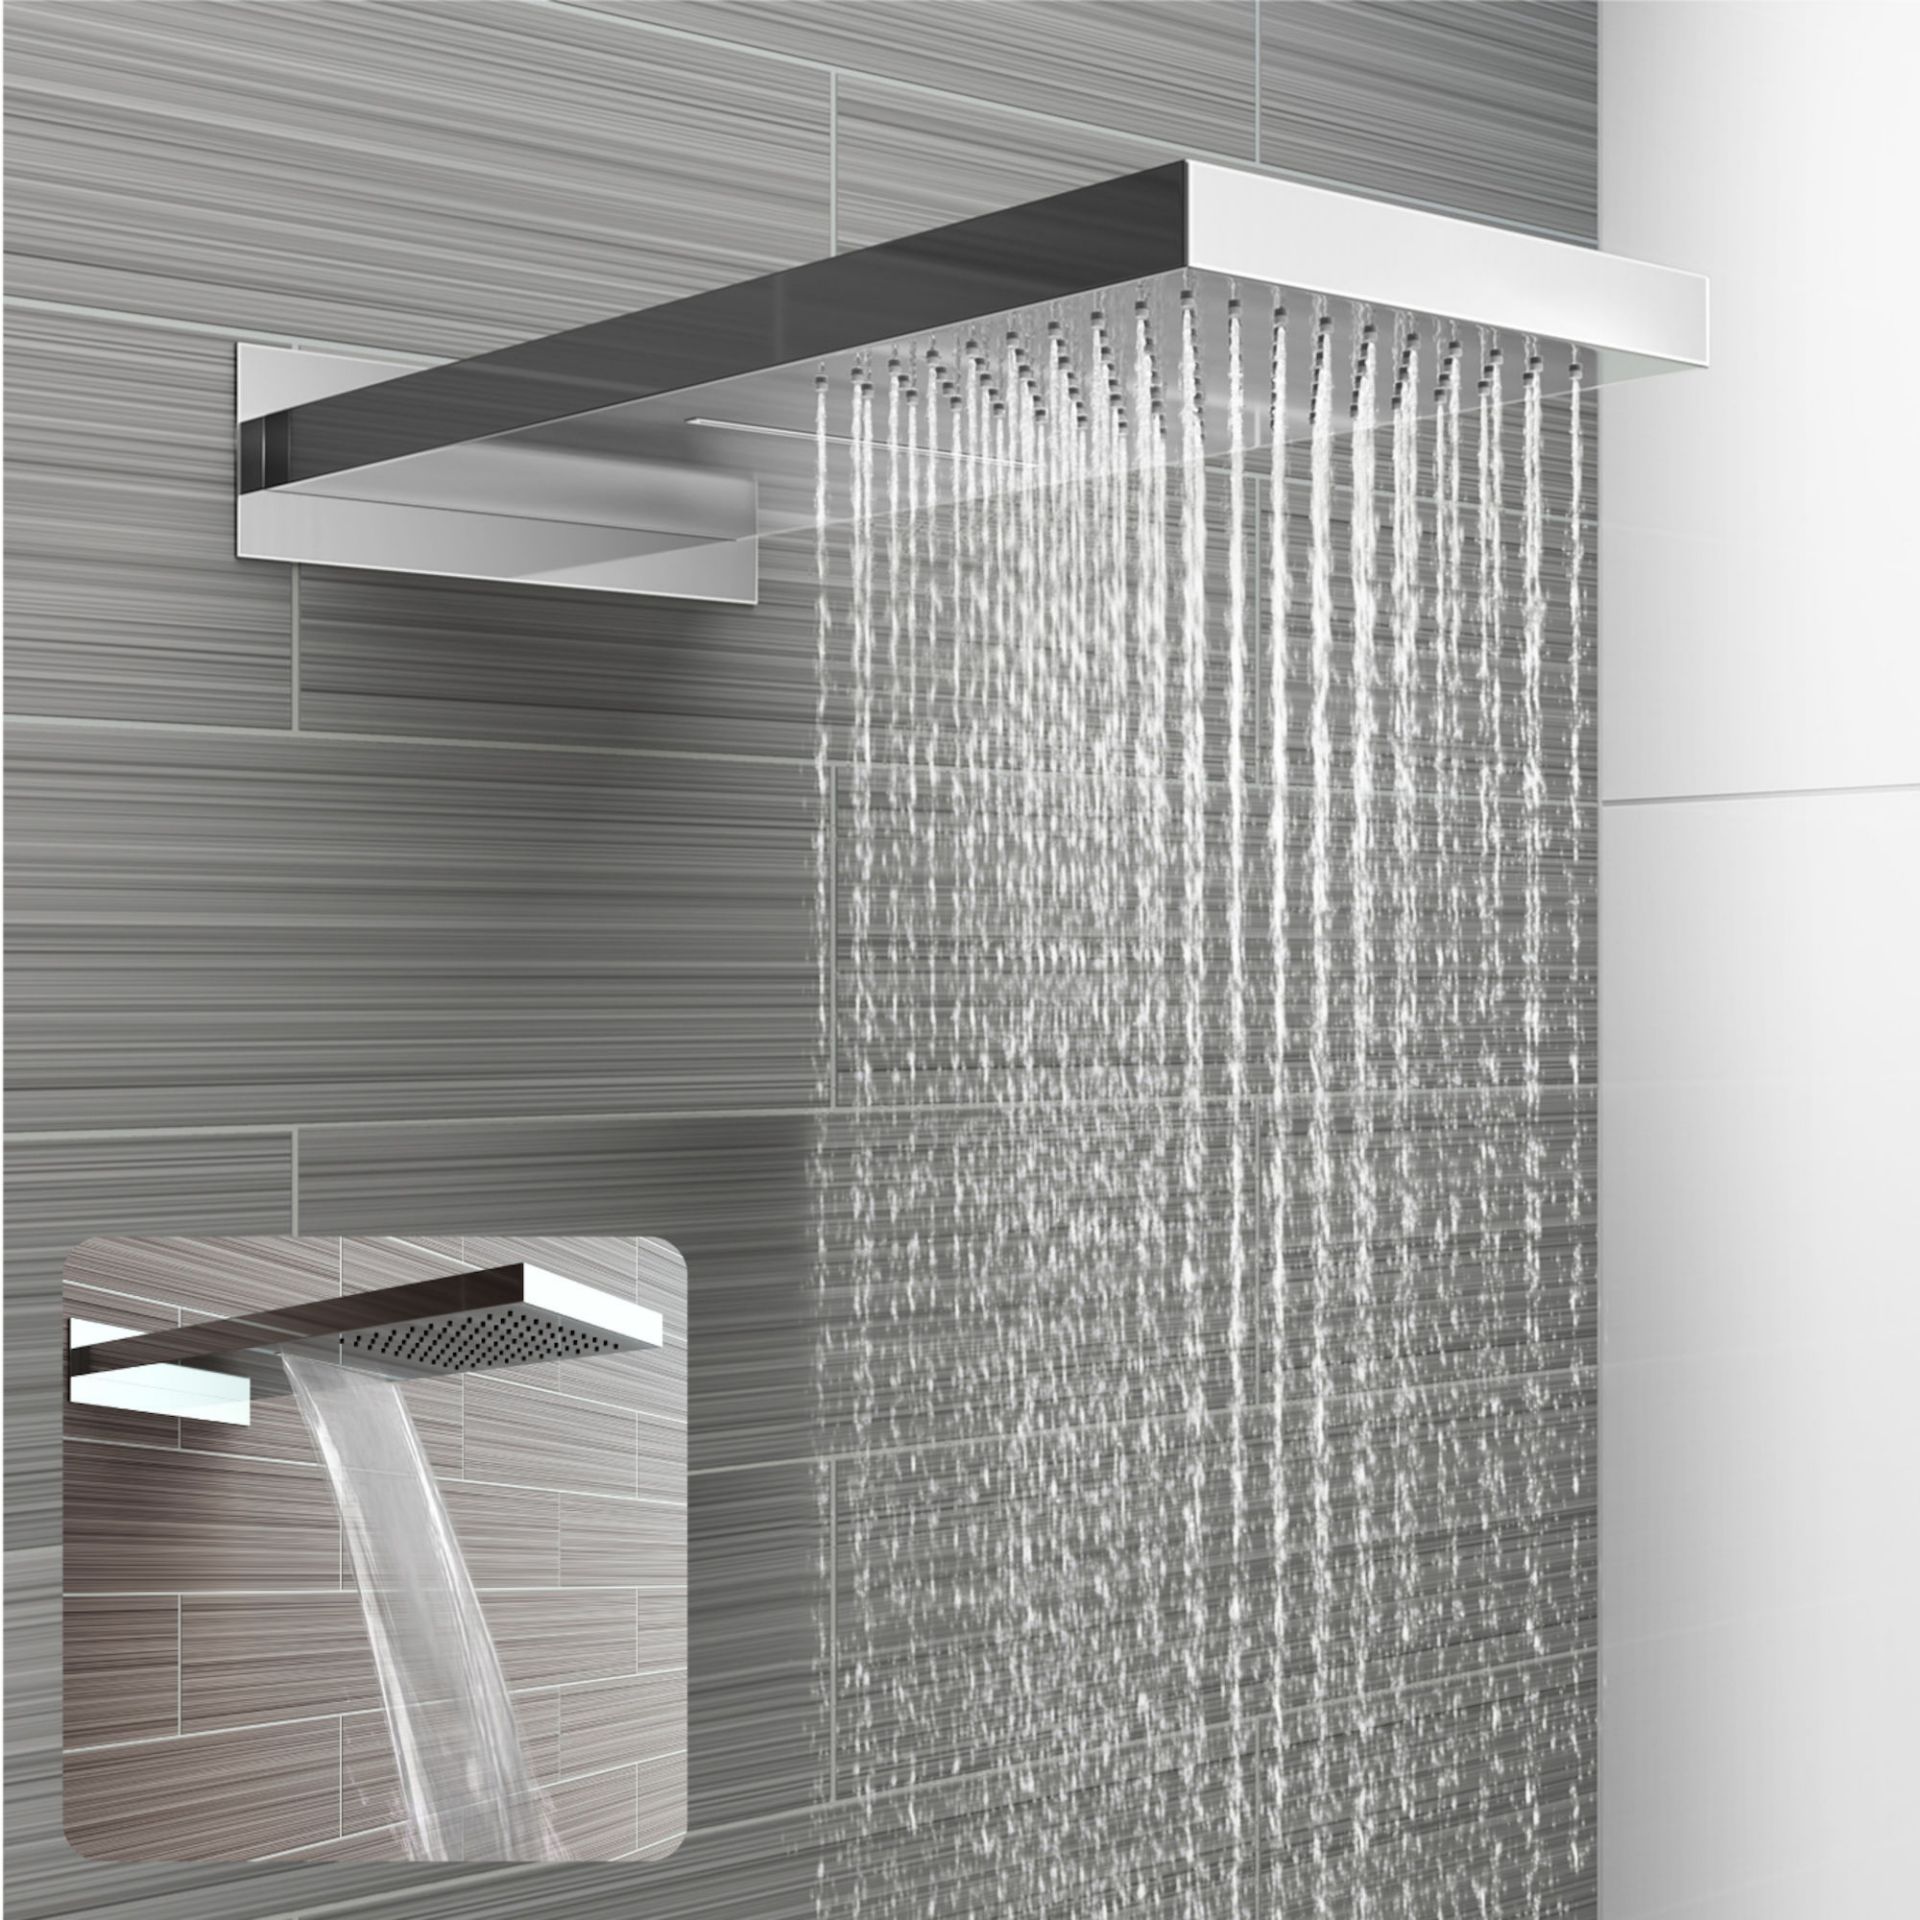 (MW37) Stainless Steel 230x500mm Waterfall Shower Head. RRP £374.99. Dual function waterfall and